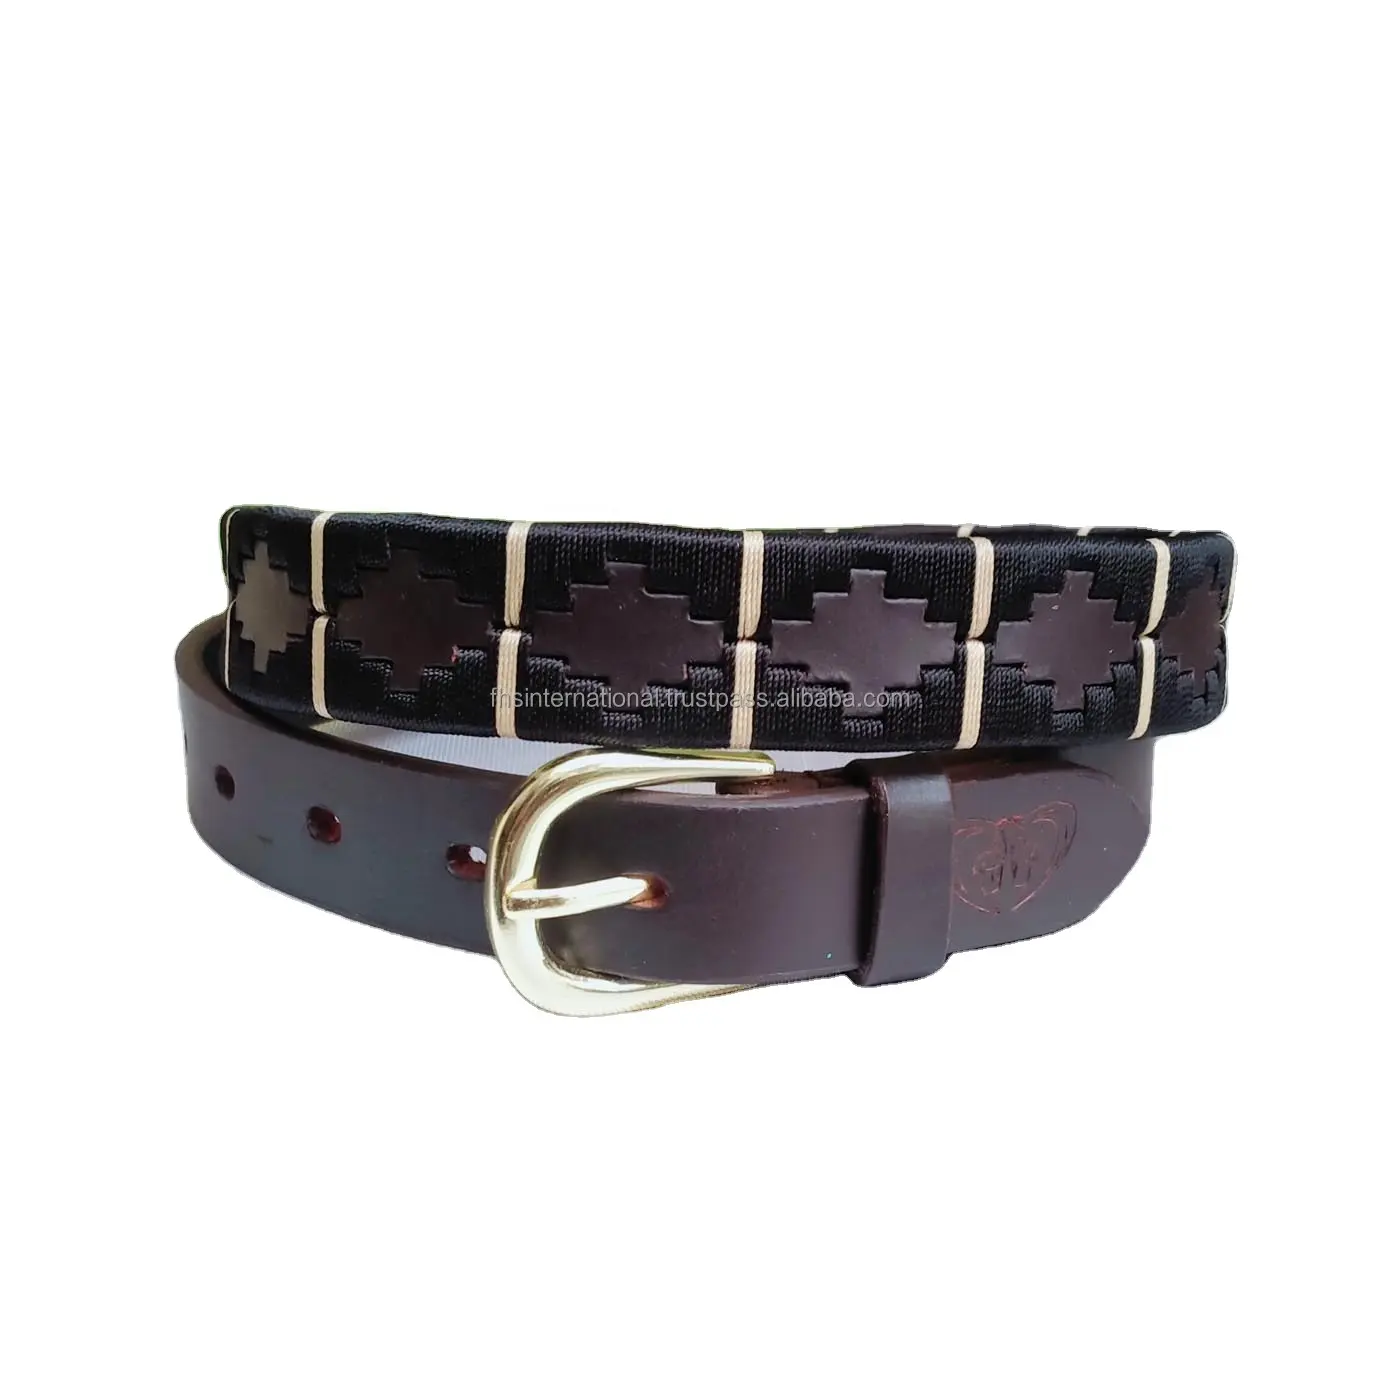 High Quality Black with Gold Strip Dark Brown Leather Polo Belt Genuine Leather Belt Hand Stitched - Zinc Alloy Buckle